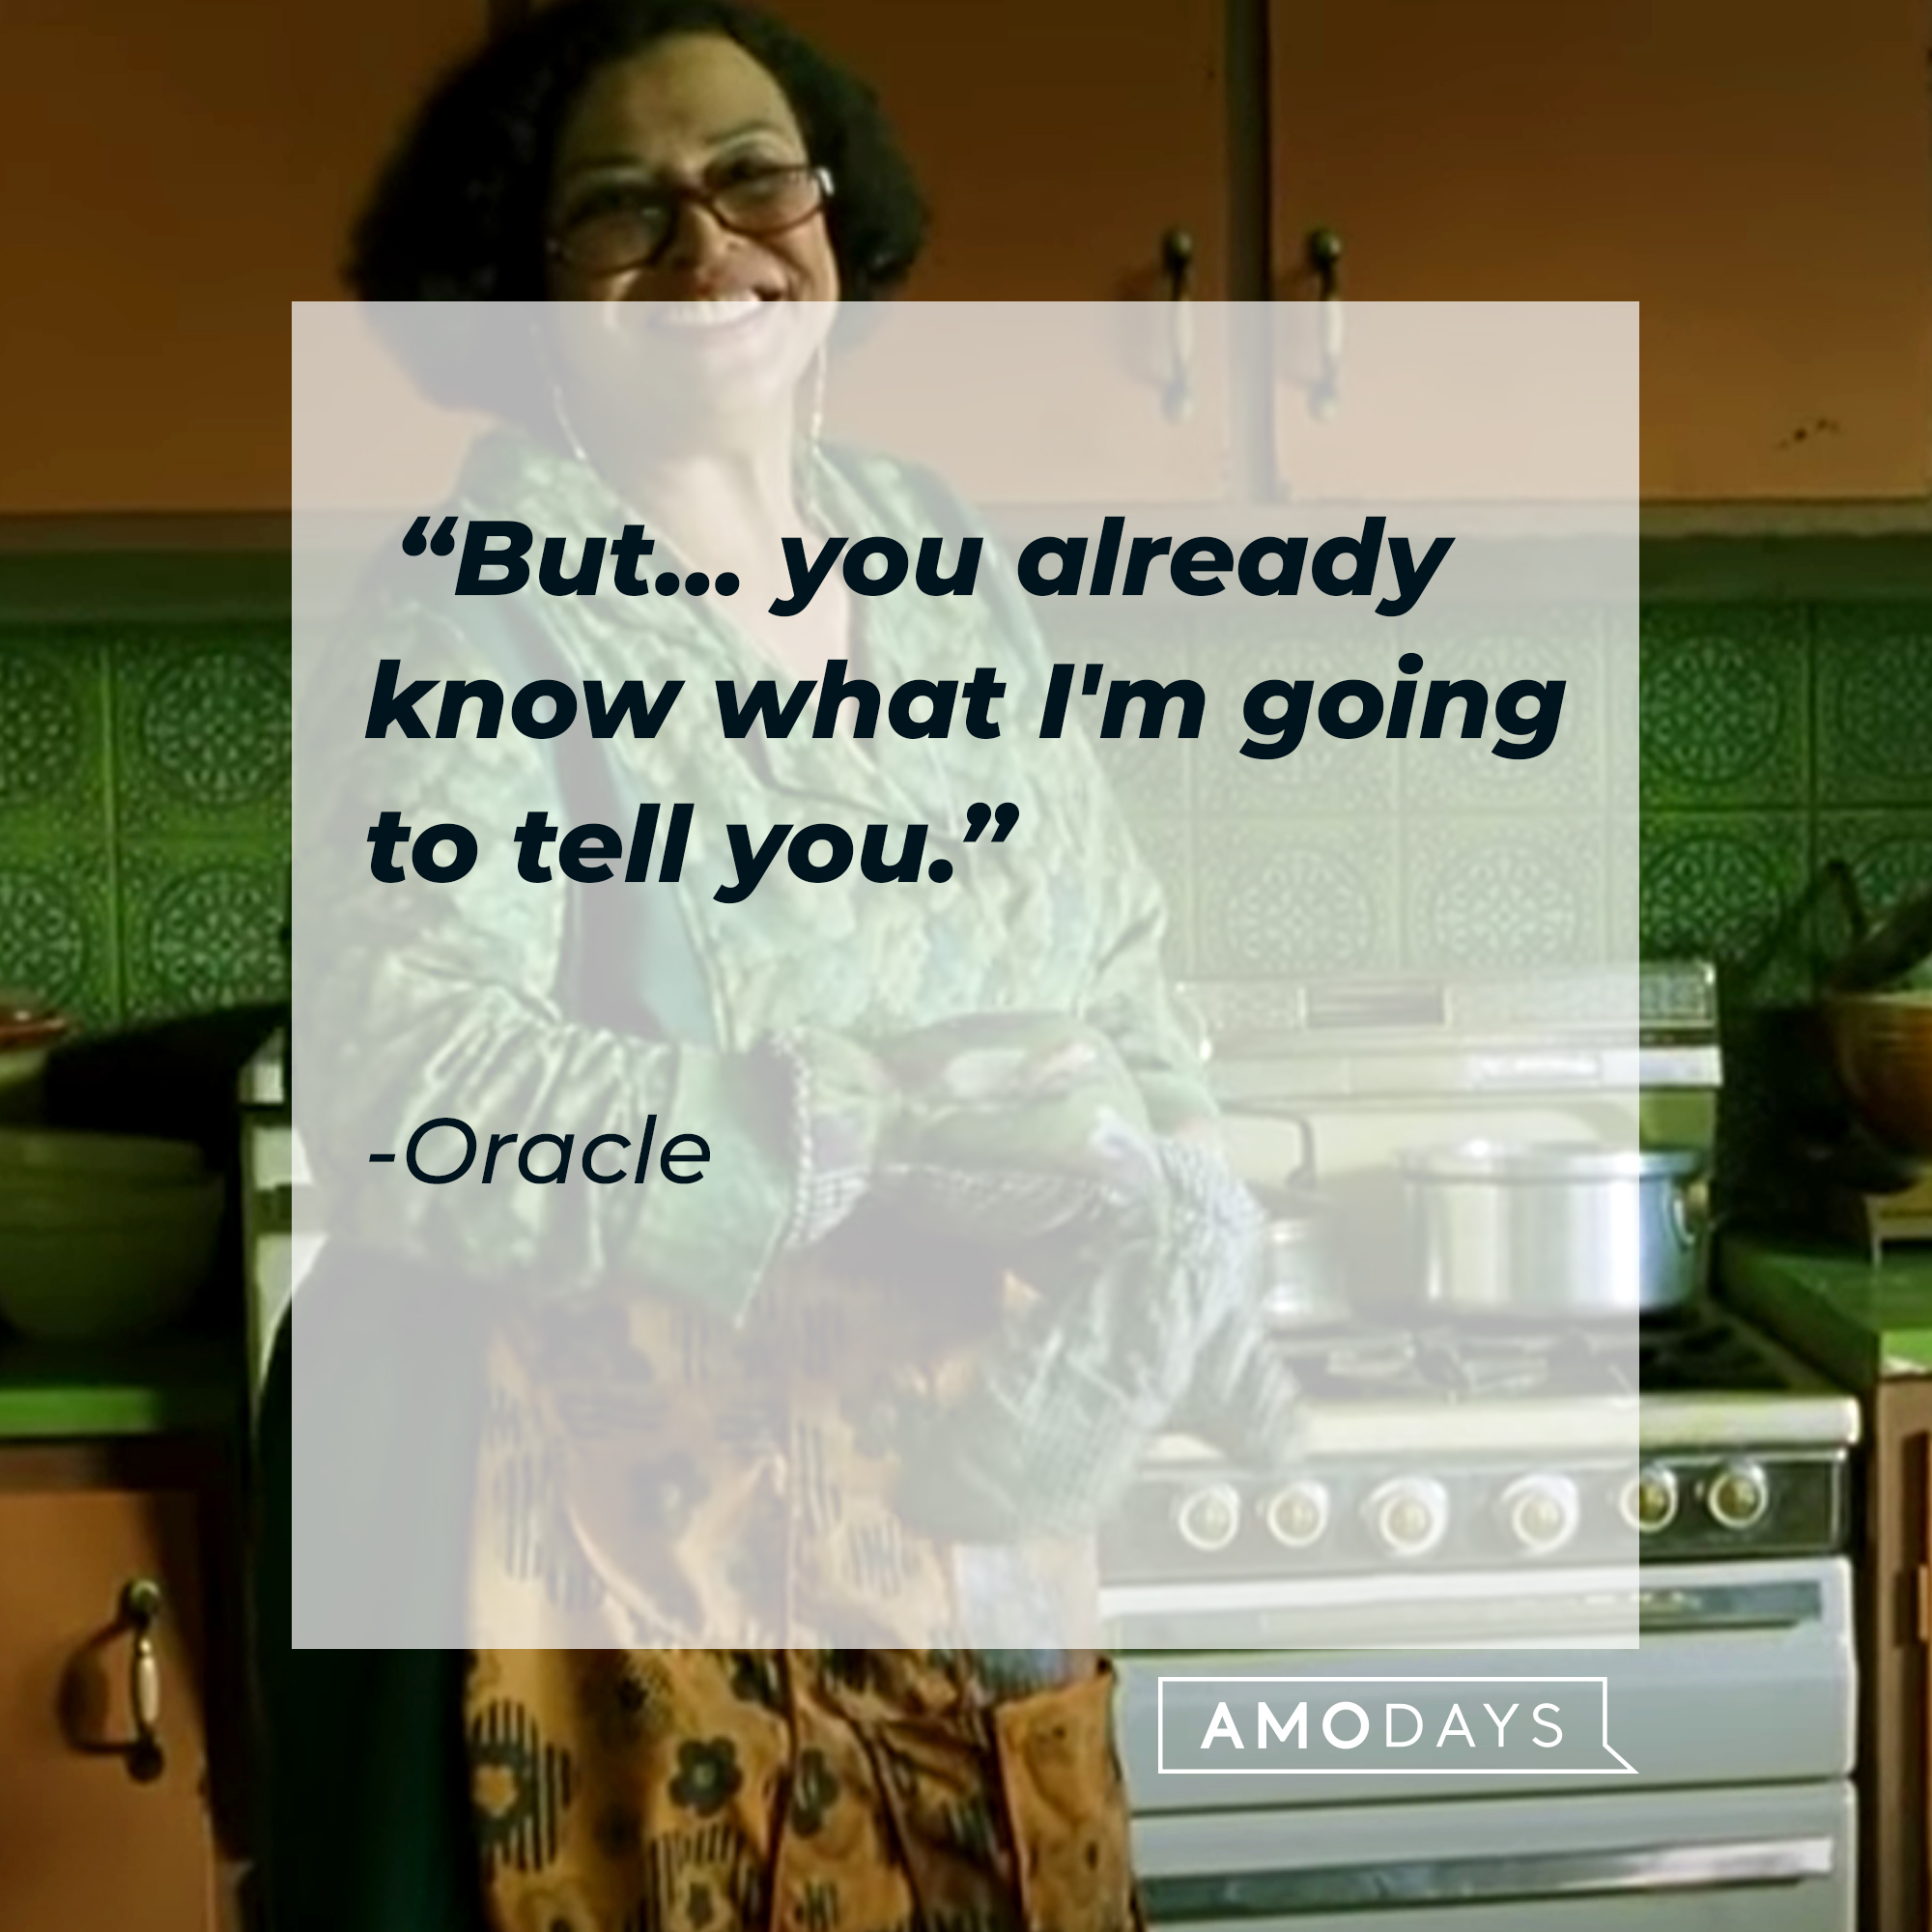 Oracle's quote: “But... you already know what I'm going to tell you.” | Source: facebook.com/TheMatrixMovie